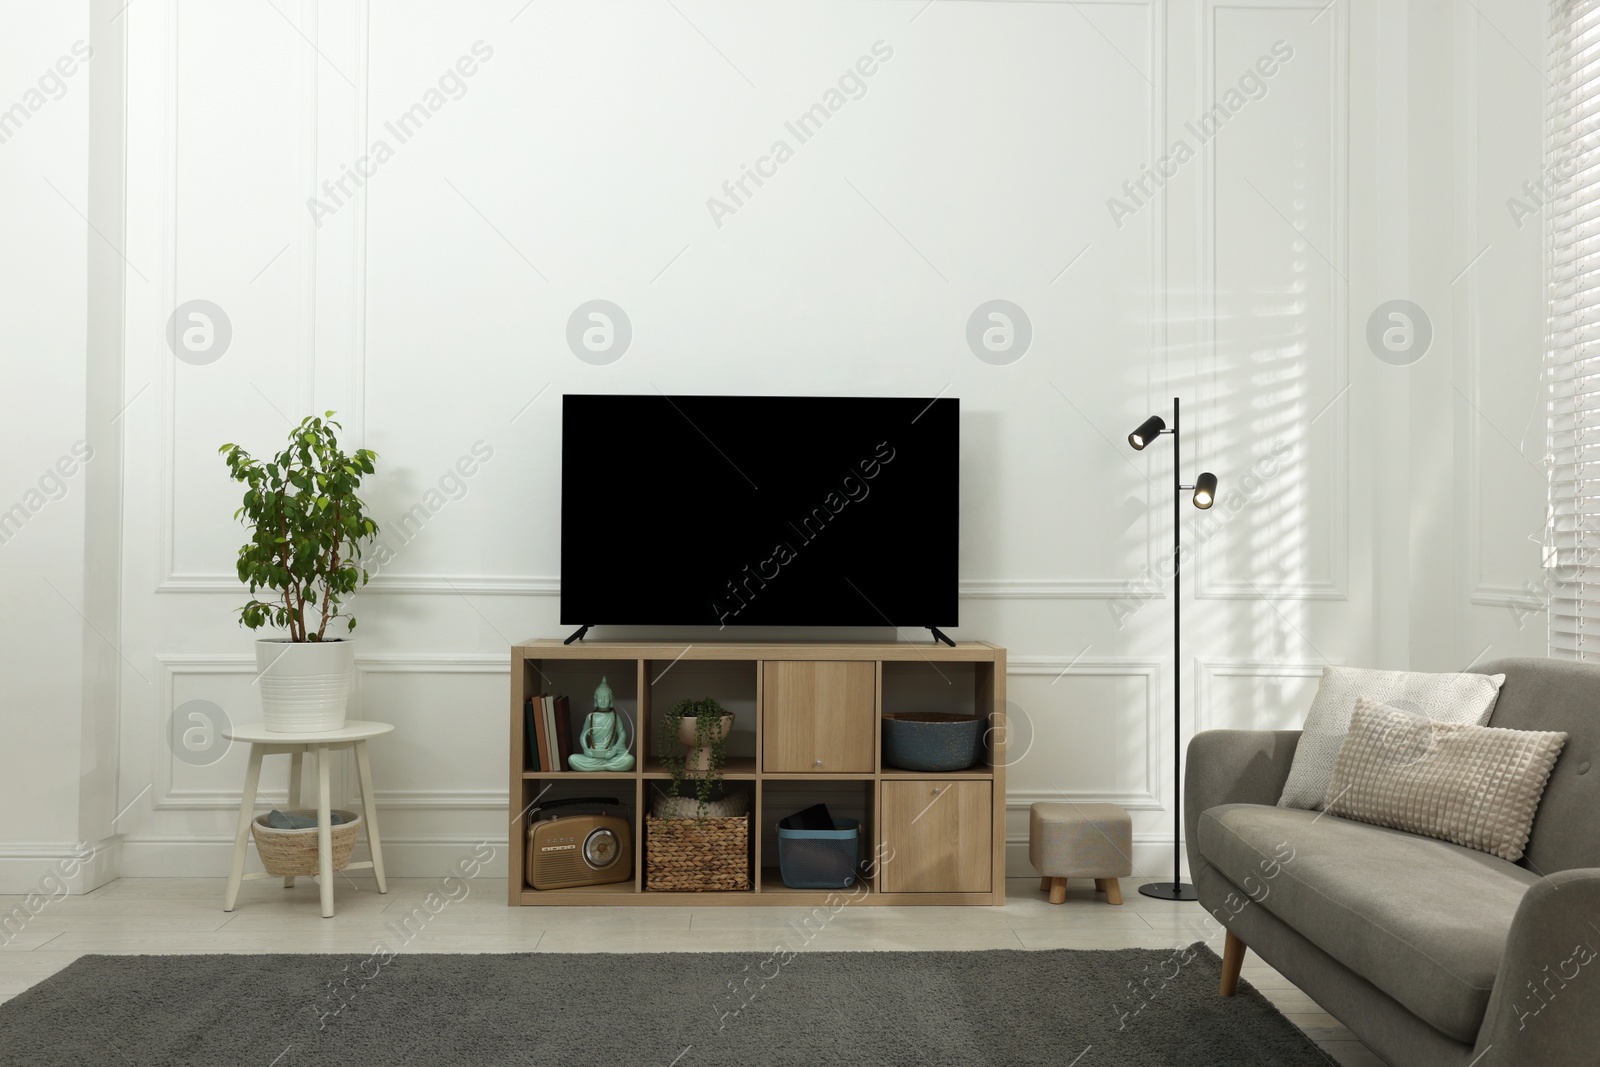 Photo of Modern TV on cabinet, sofa and beautiful houseplant indoors. Interior design